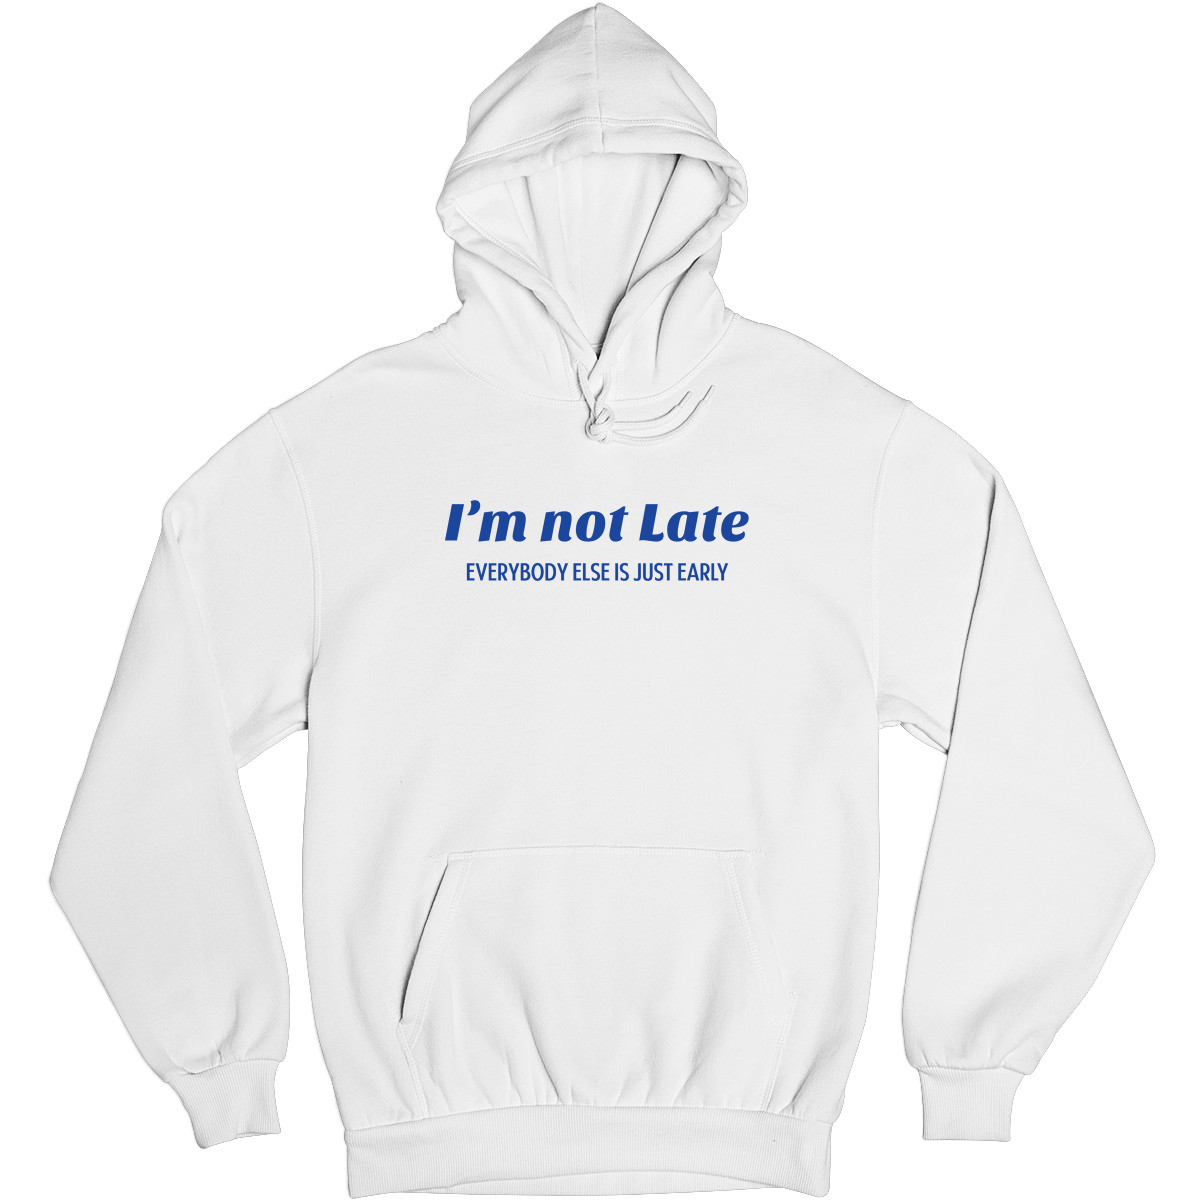 I’m not late everybody else is just early Unisex Hoodie | White